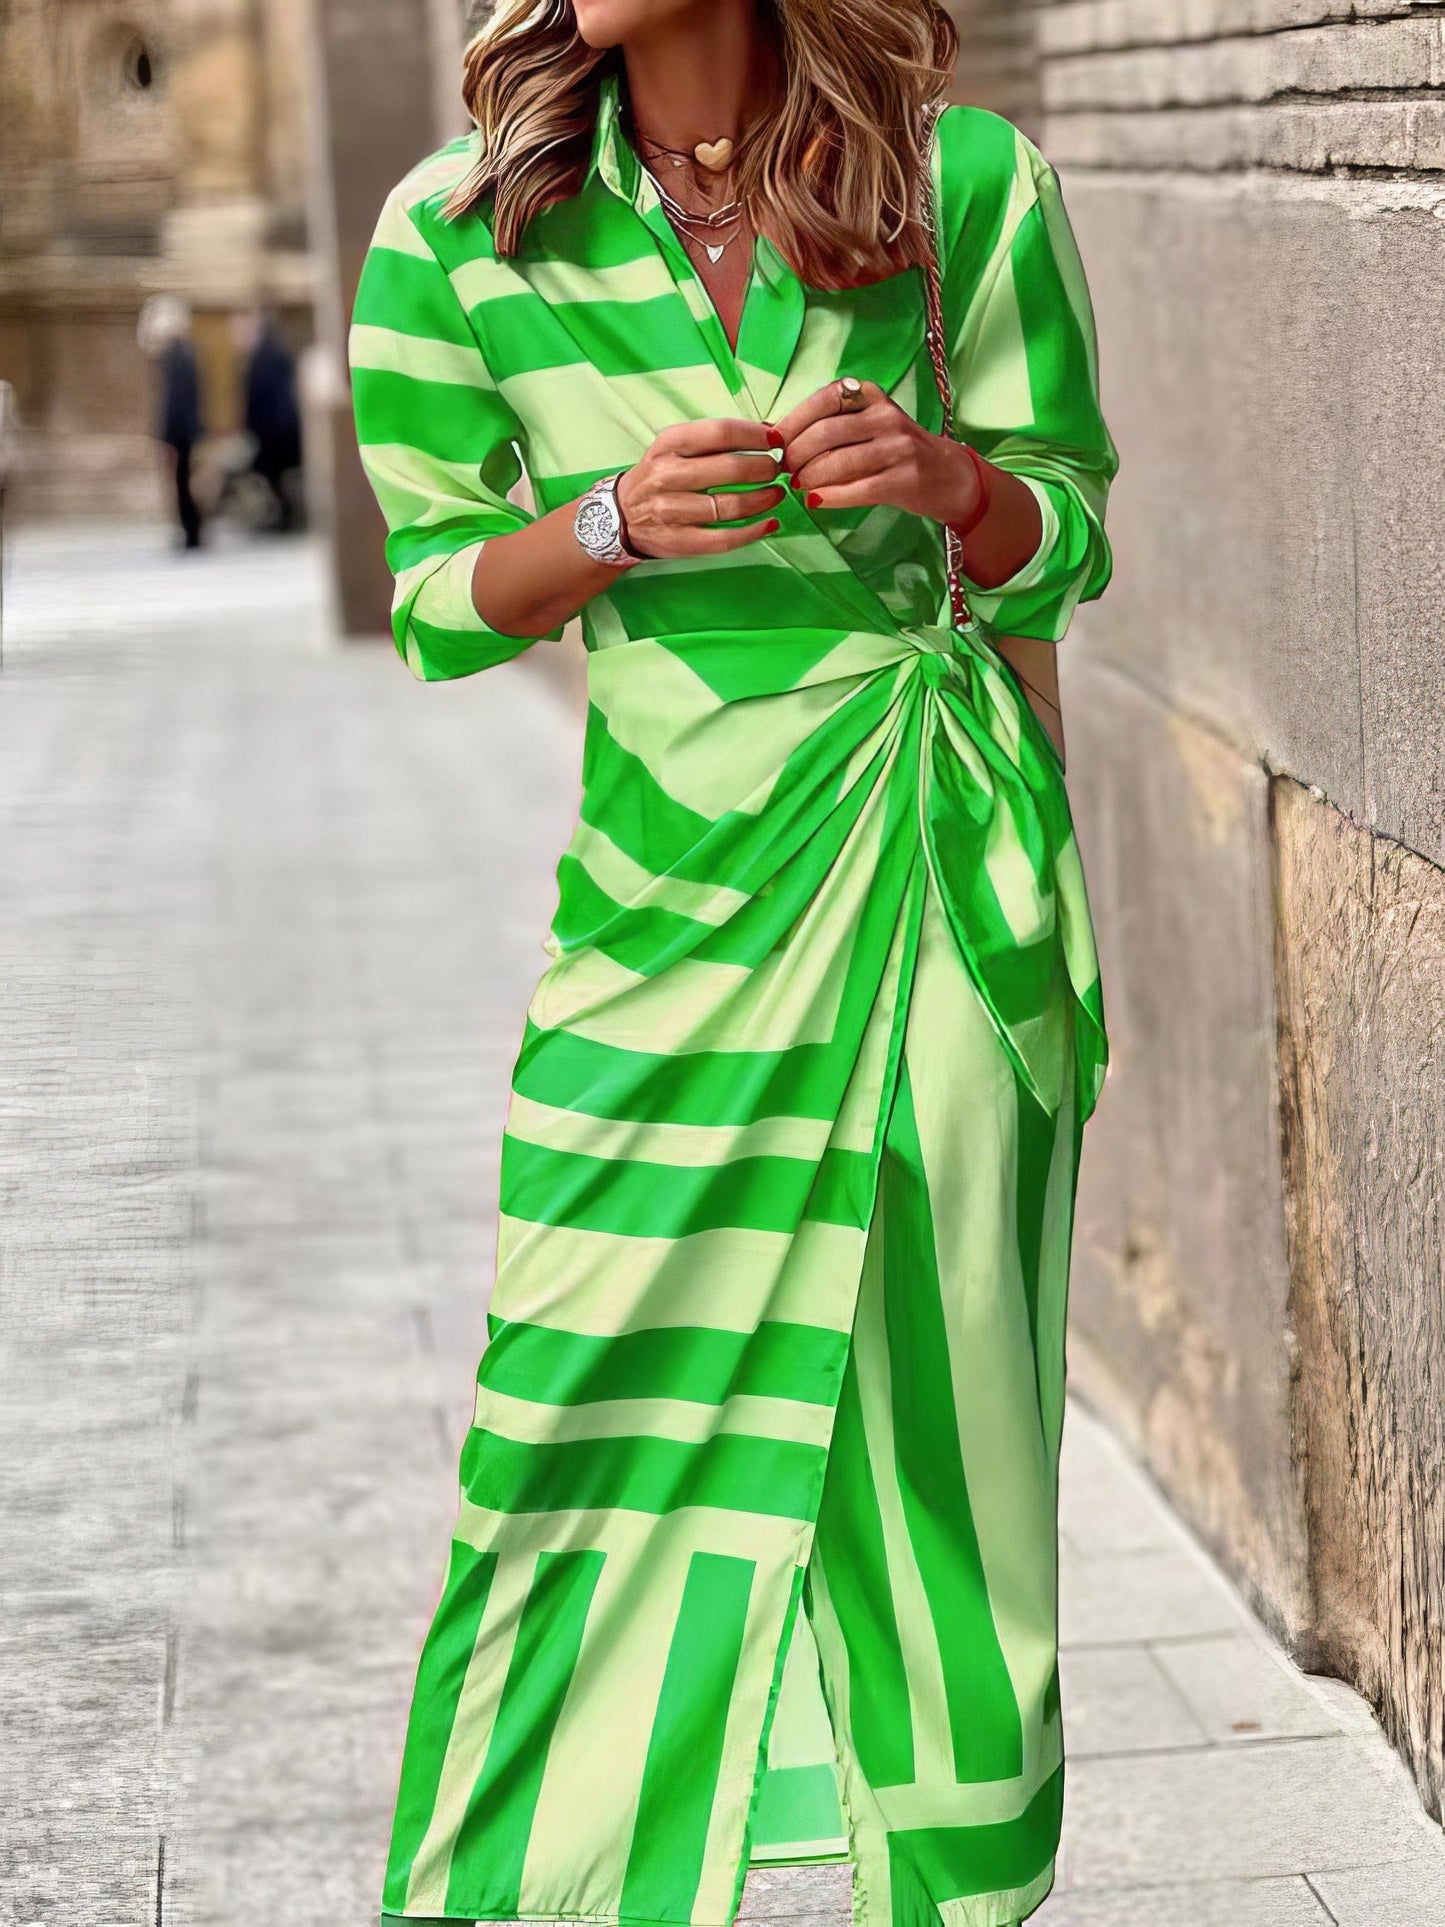 Lapel Striped Print Belted Long Sleeve Dress cc4DRE2205054089GRES Green / 2 (S)